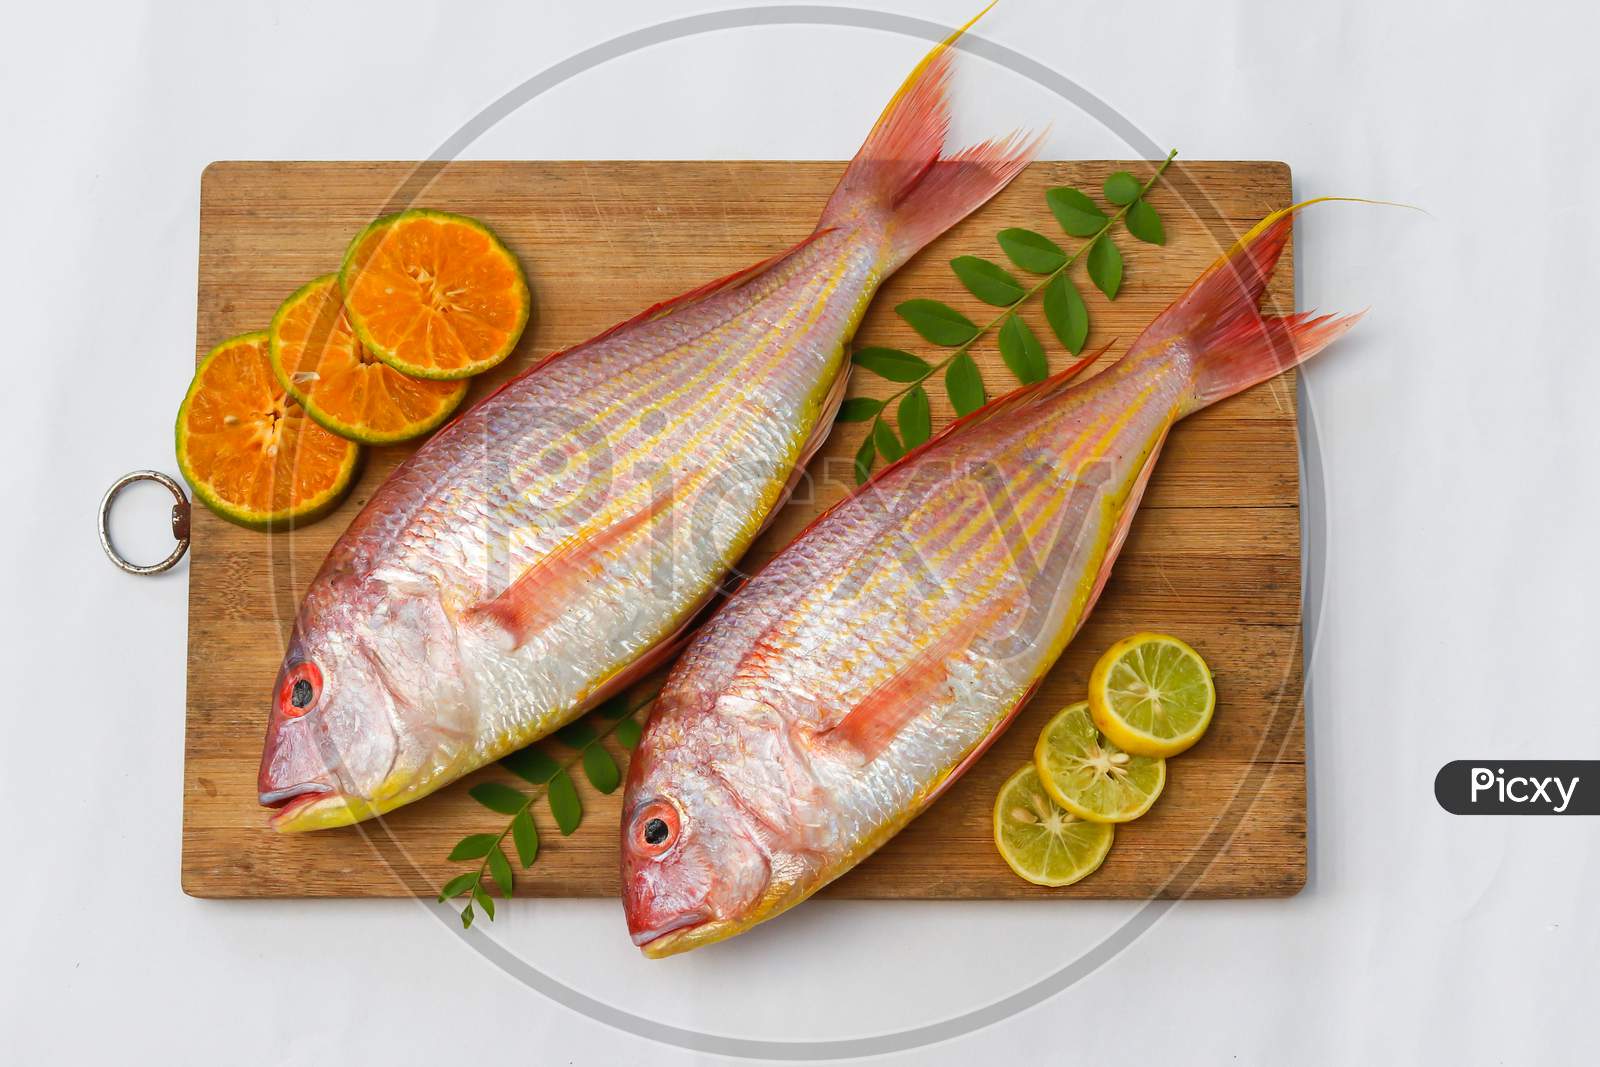 Top View Of View Of Fresh Pink Perch (Thread Finned Bream) Decorated With Lemon Slice,Orange Slice And Curry Leaves On A Wooden Pad,White Background,Selective Focus.